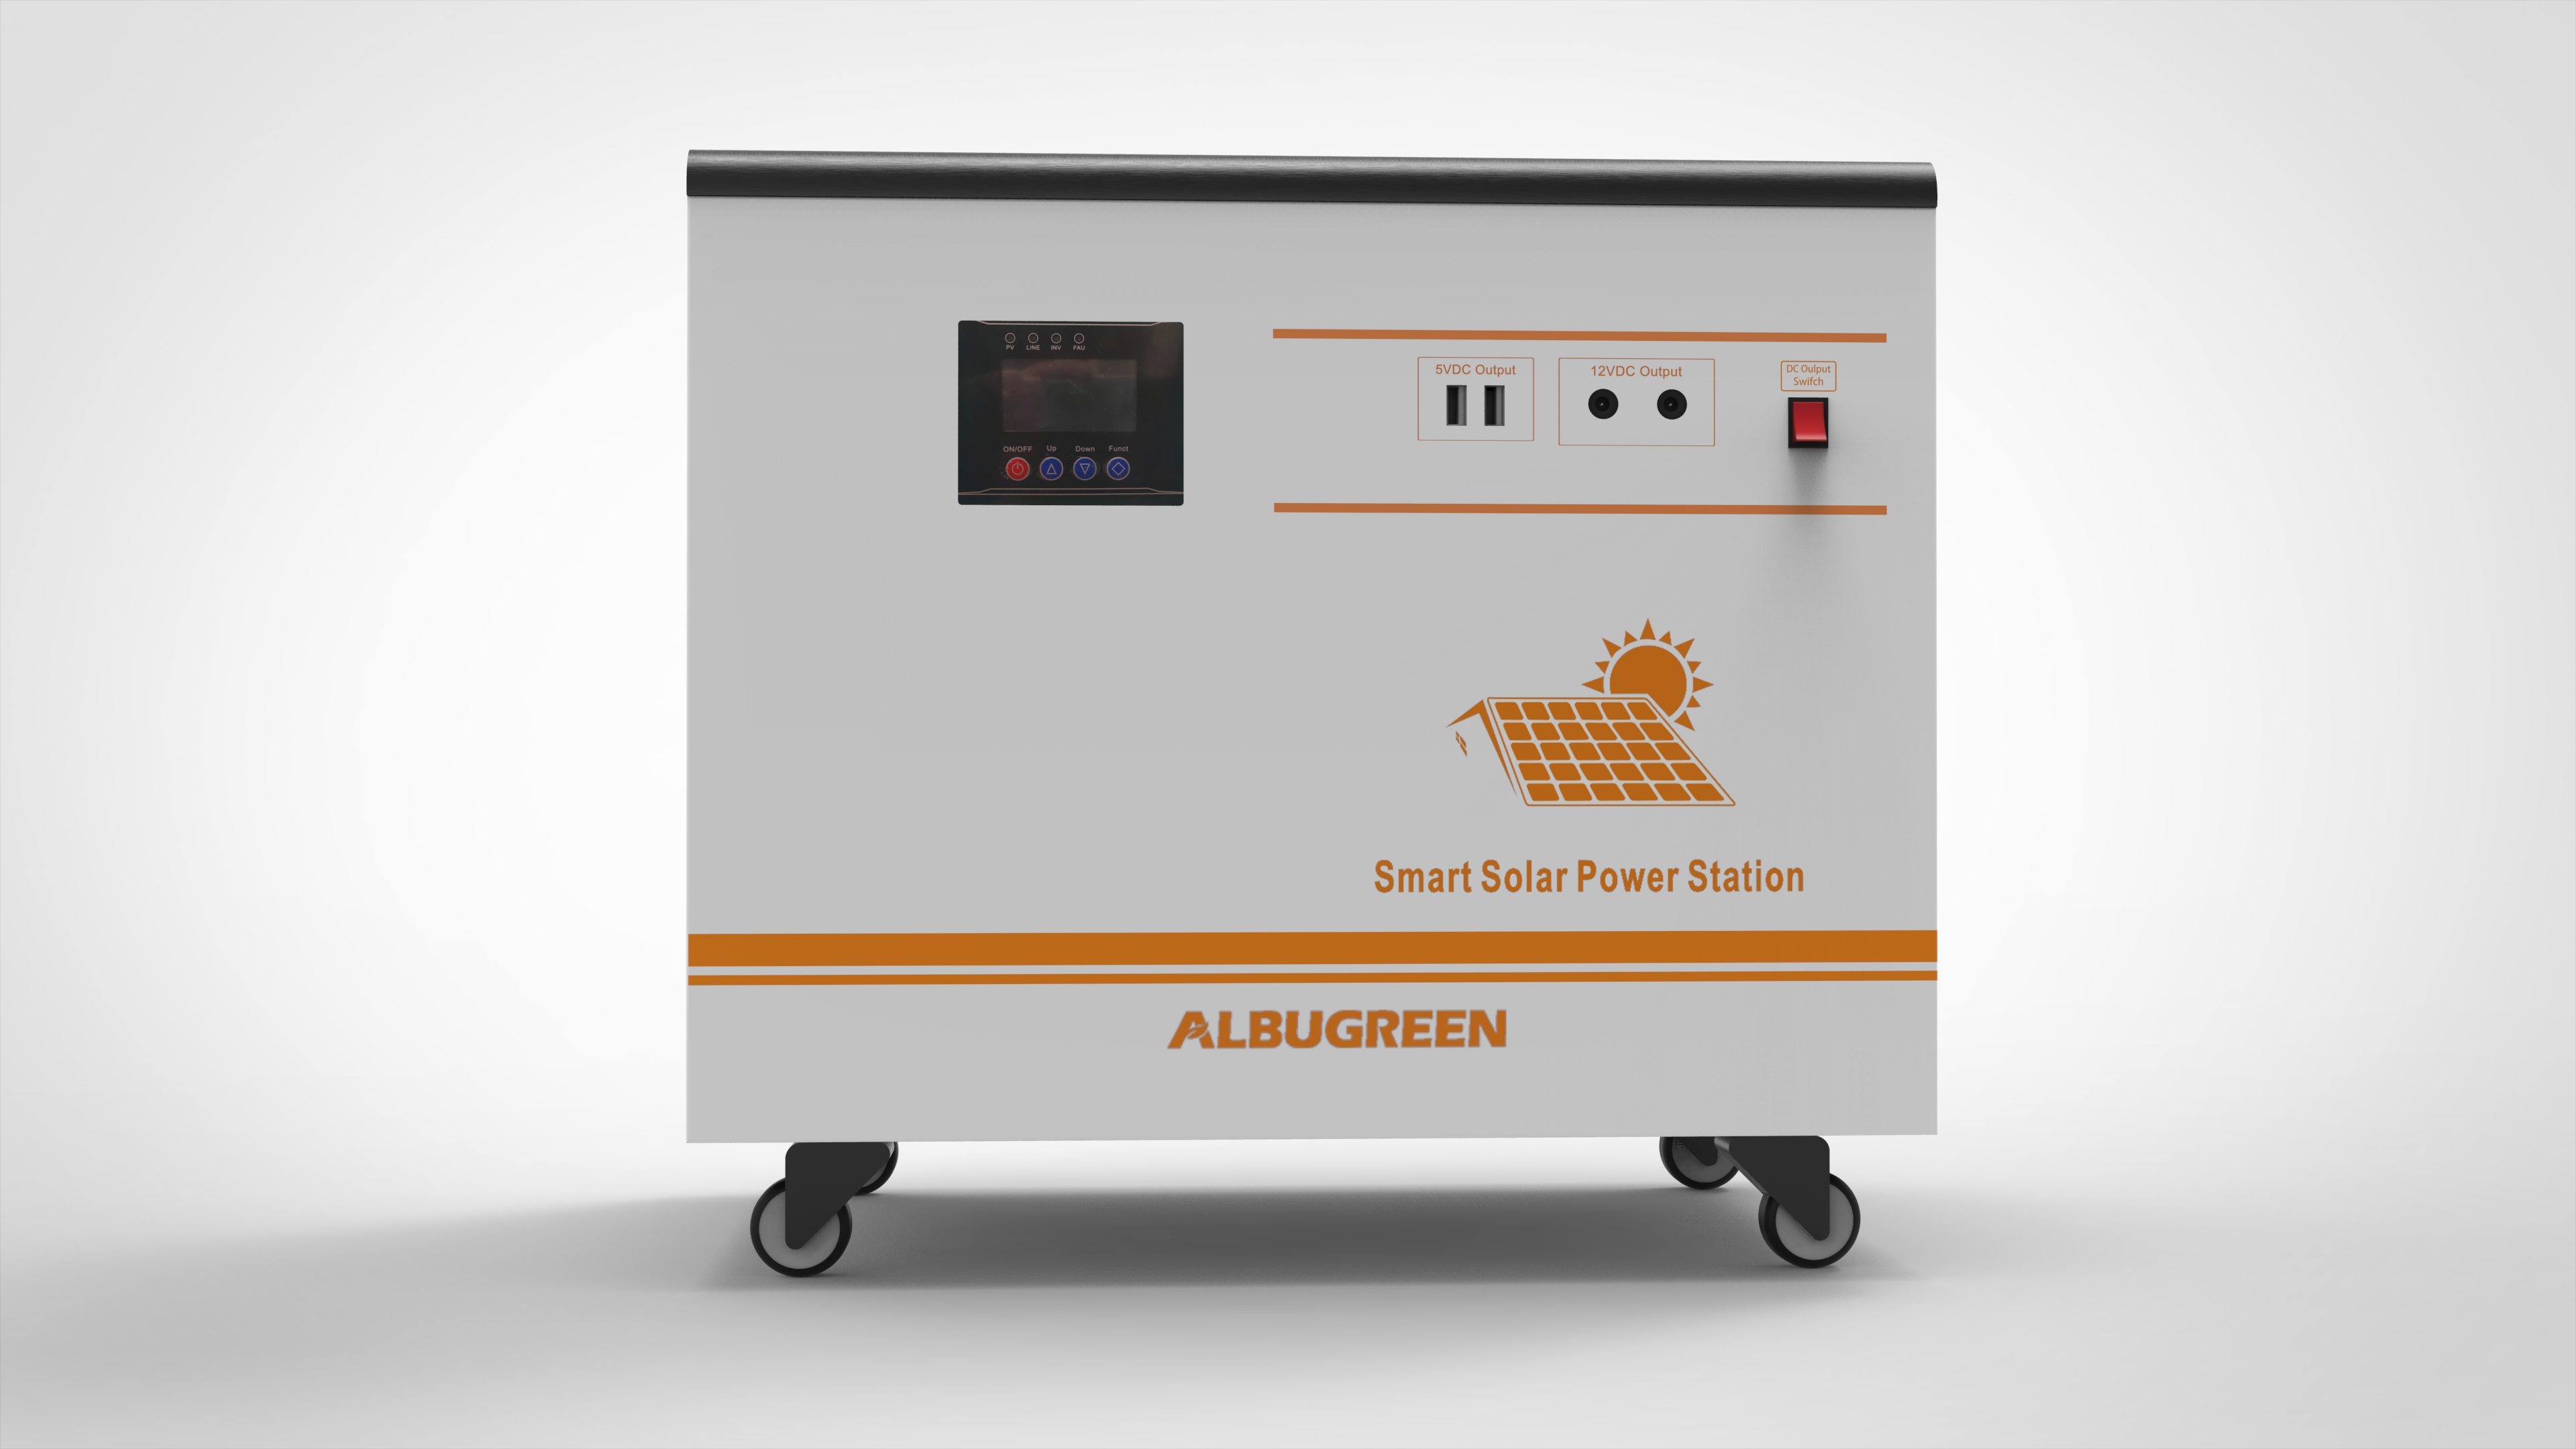 3000w 110v with Battery Ports in One Solar Power System for Sale